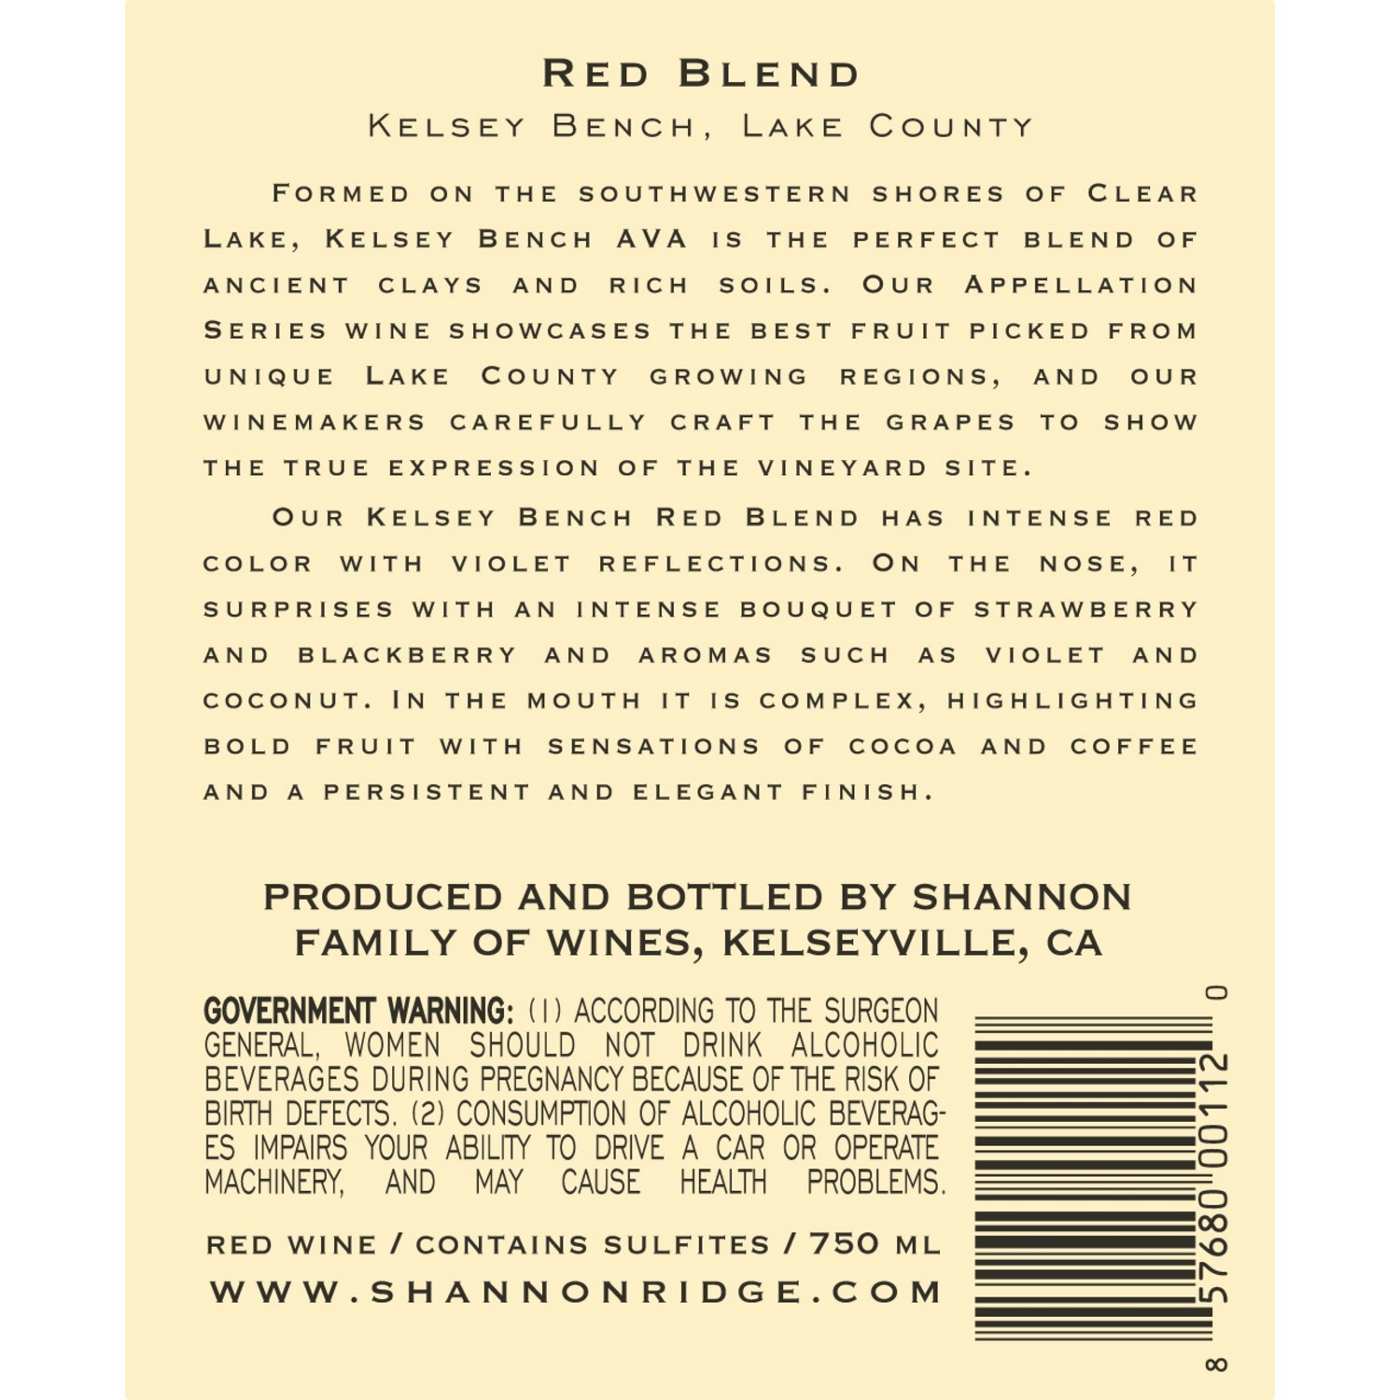 Shannon Ridge Home Ranch Red Blend; image 3 of 3